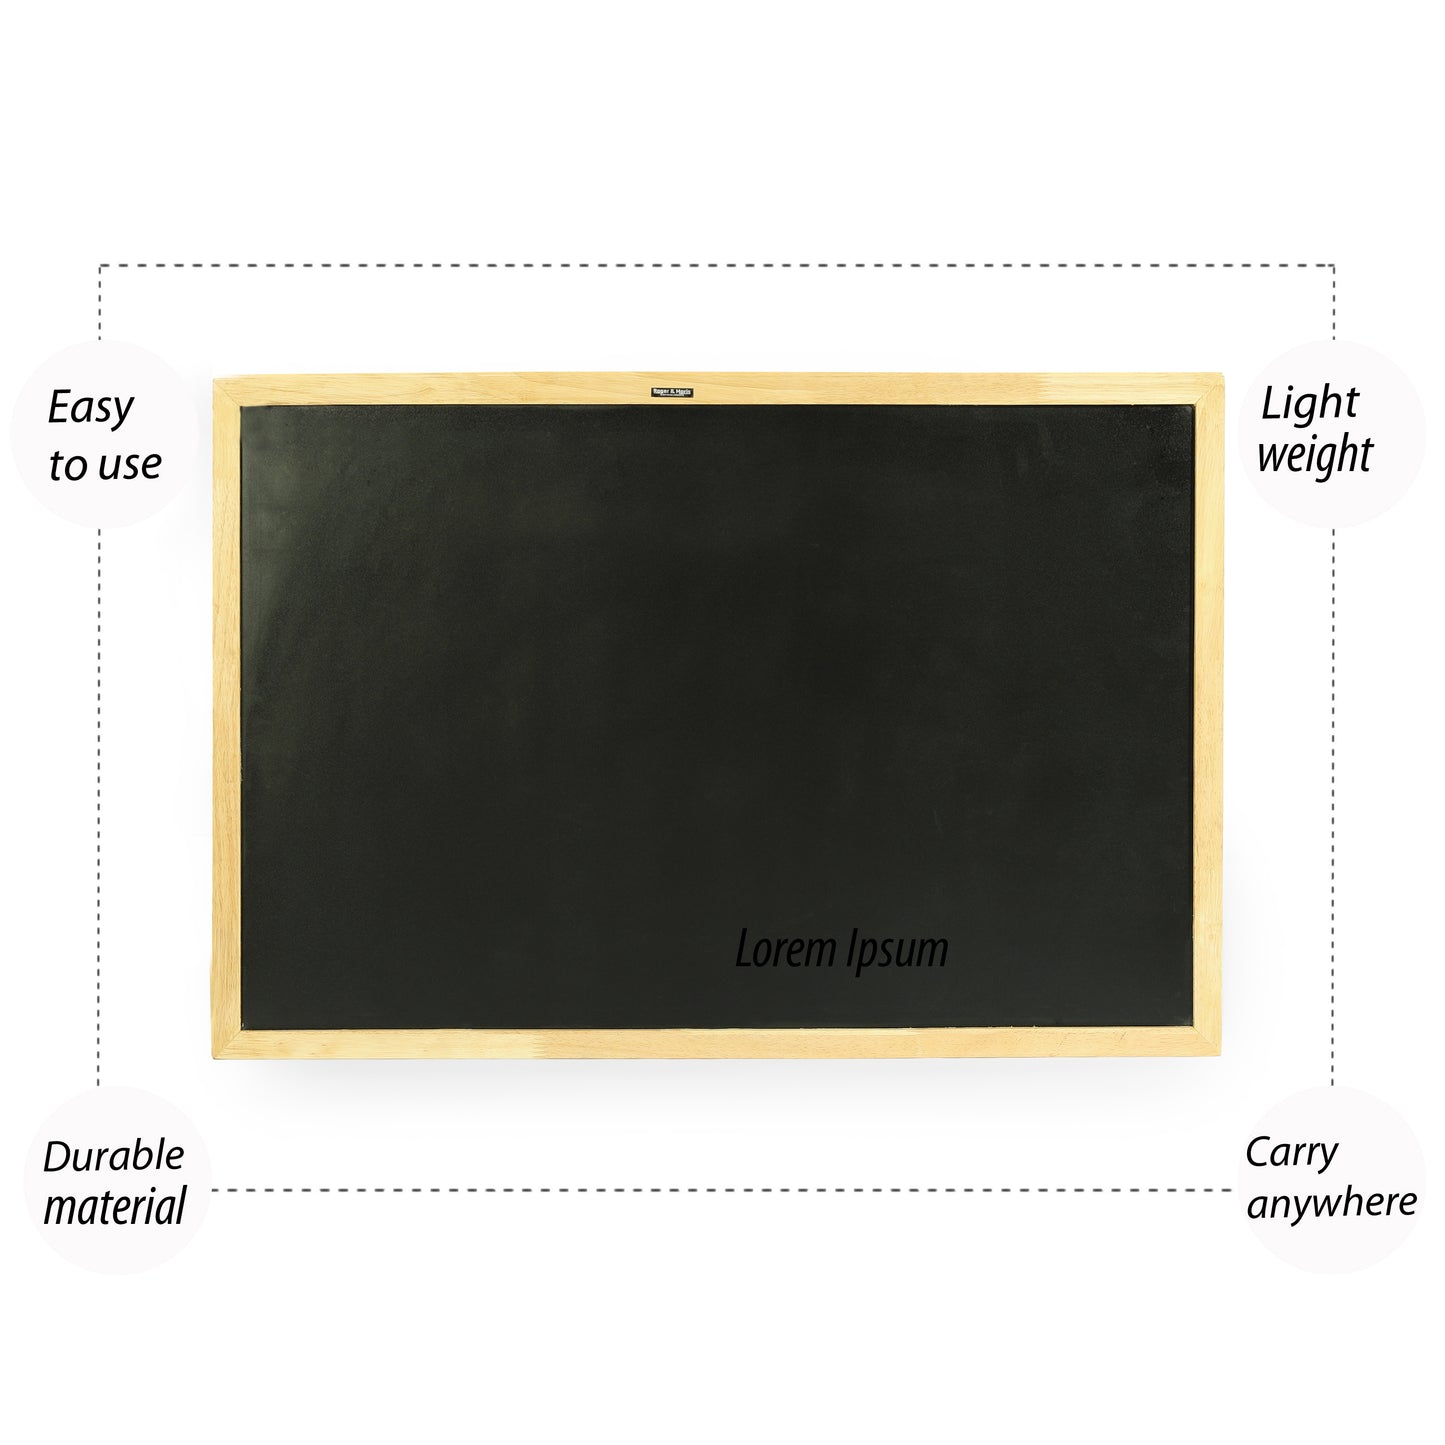 Roger & Moris Wooden (Rubber Wood) Framed Chalk Board - Non Magnetic, Lightweight for Home, Office and School (Black, Size : 2 feet x 3 feet)